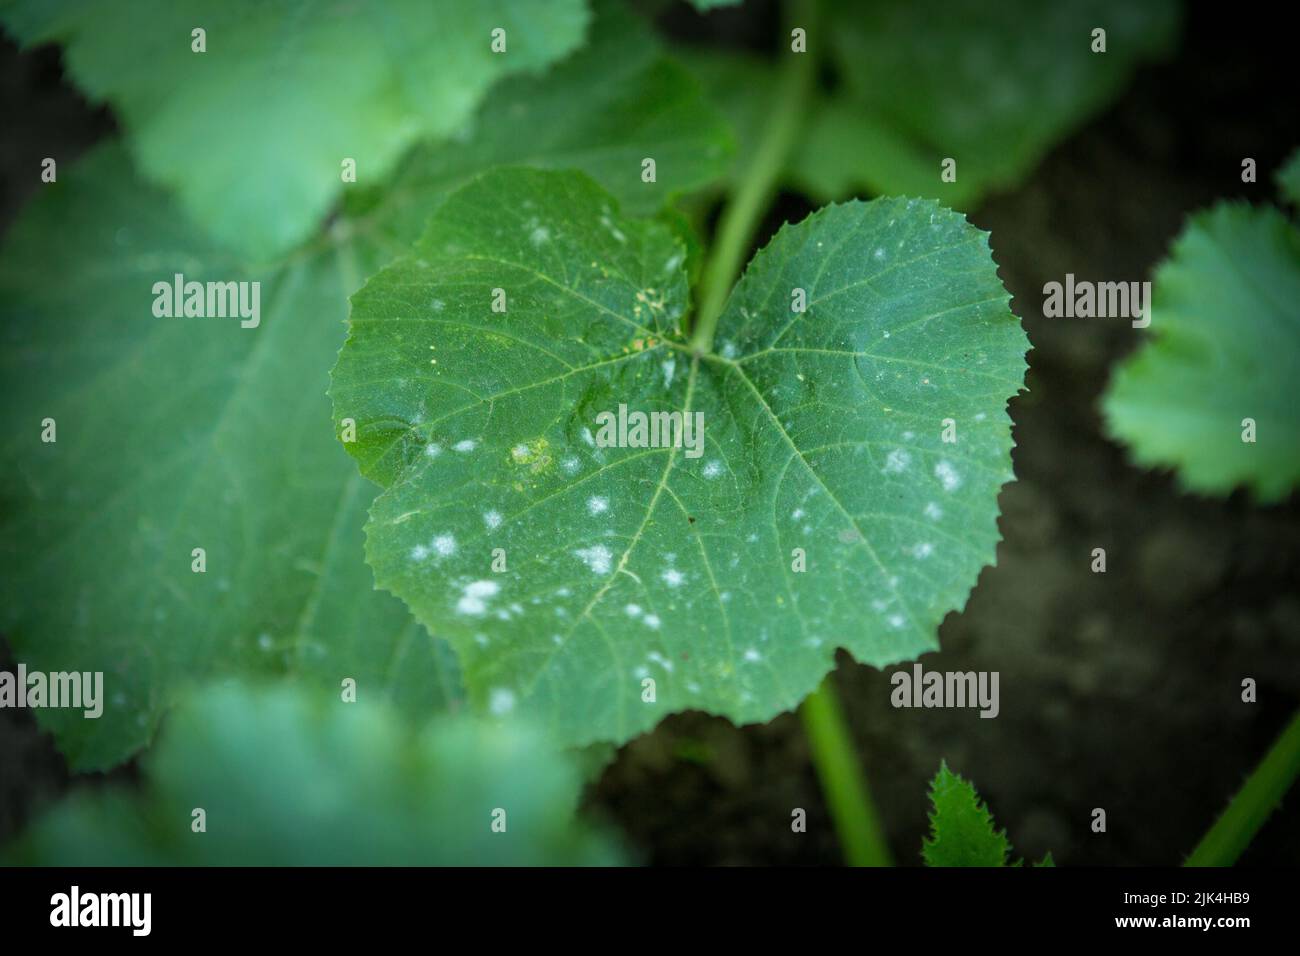 A zucchini leaf affected by the disease, with white spots. Fungal or viral disease of plants. Problems in the organic cultivation of vegetables, mista Stock Photo